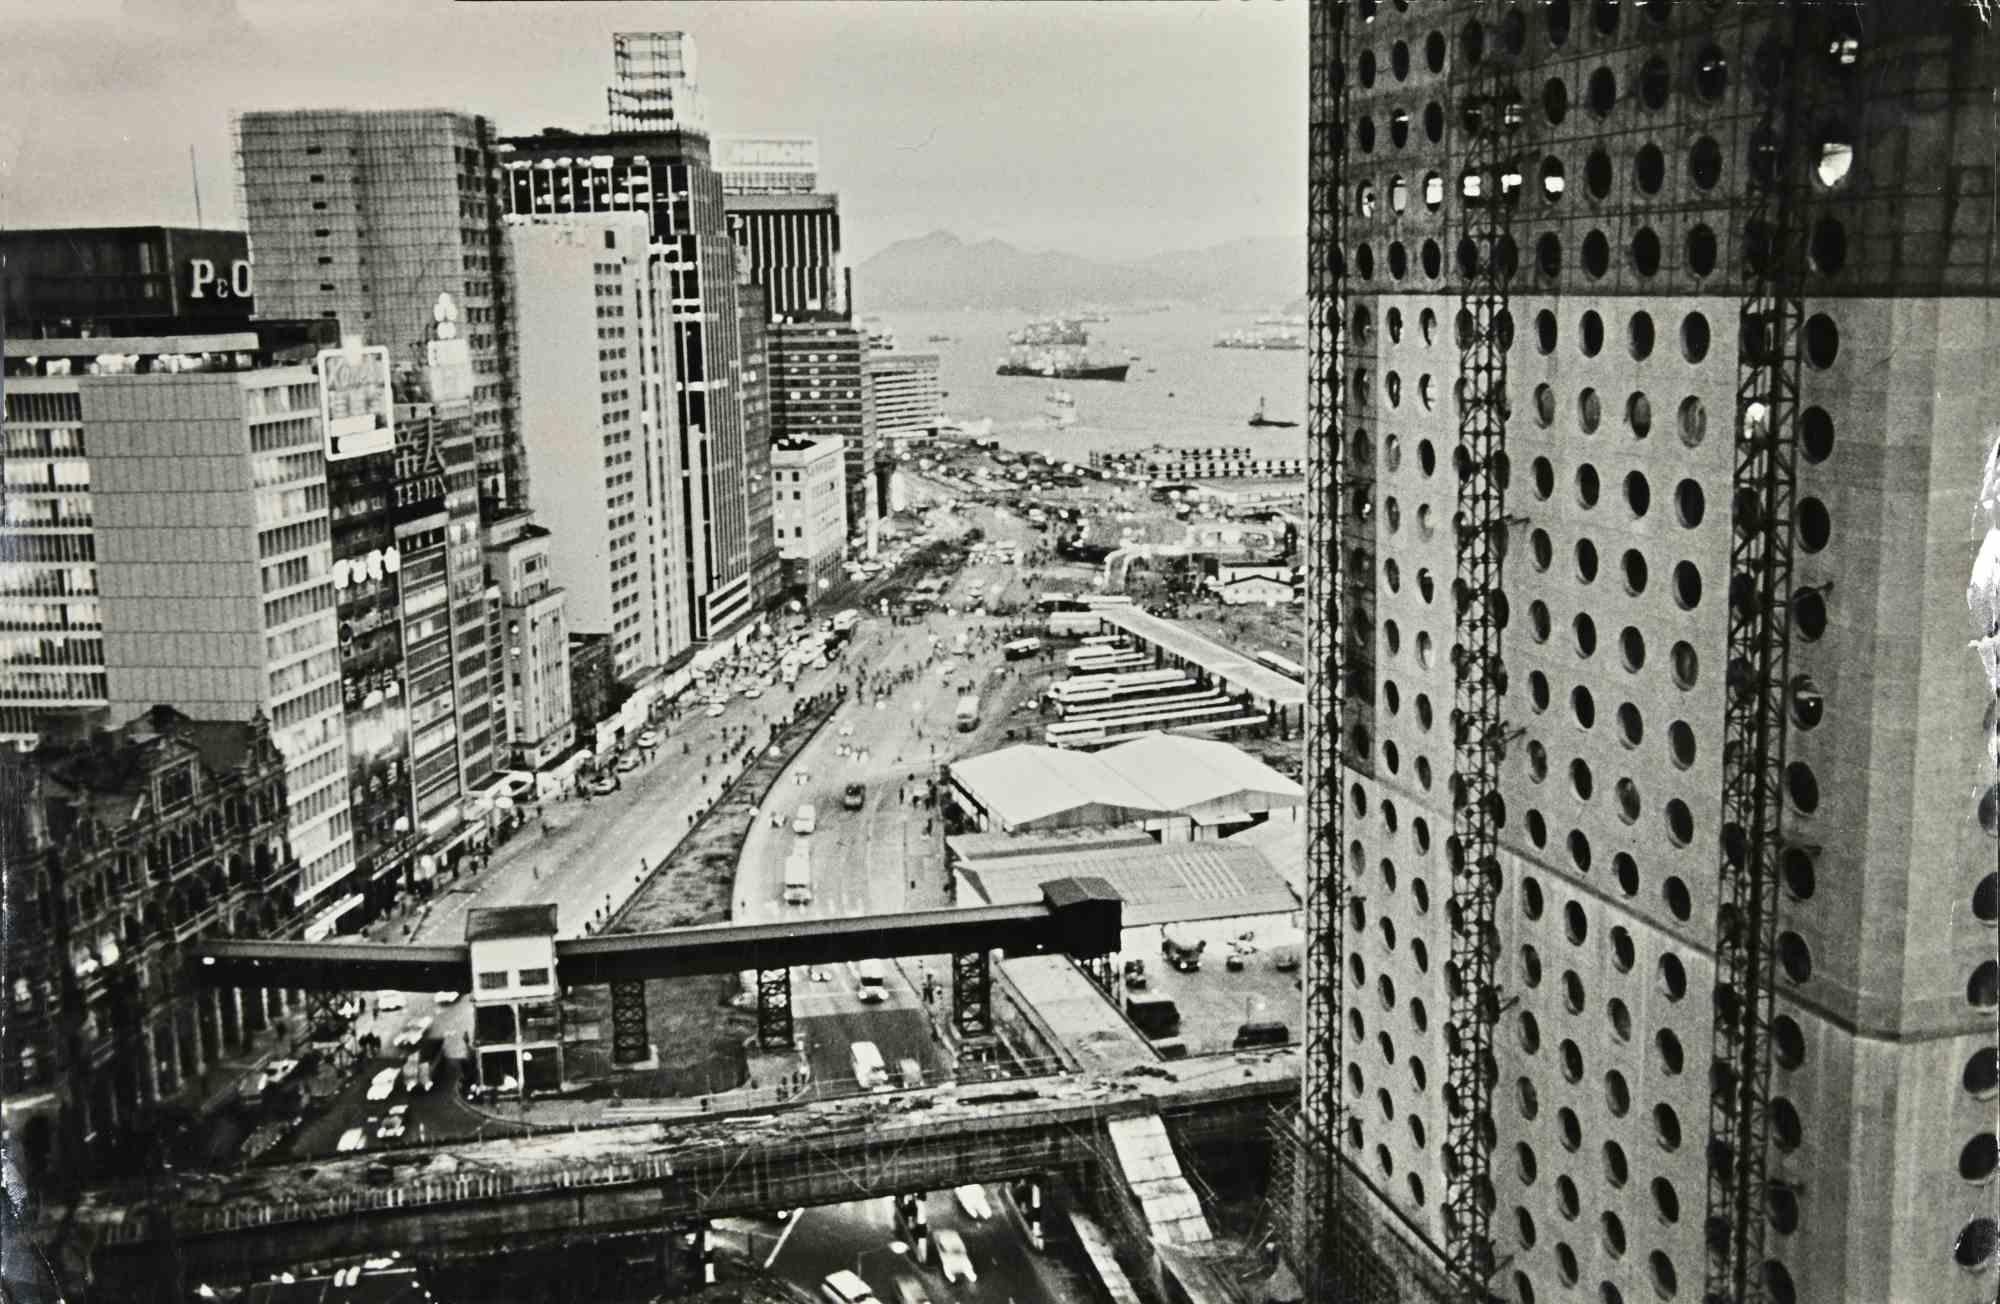 Hong Kong – The New Face of the Orient - Vintage Photograph - 1960s